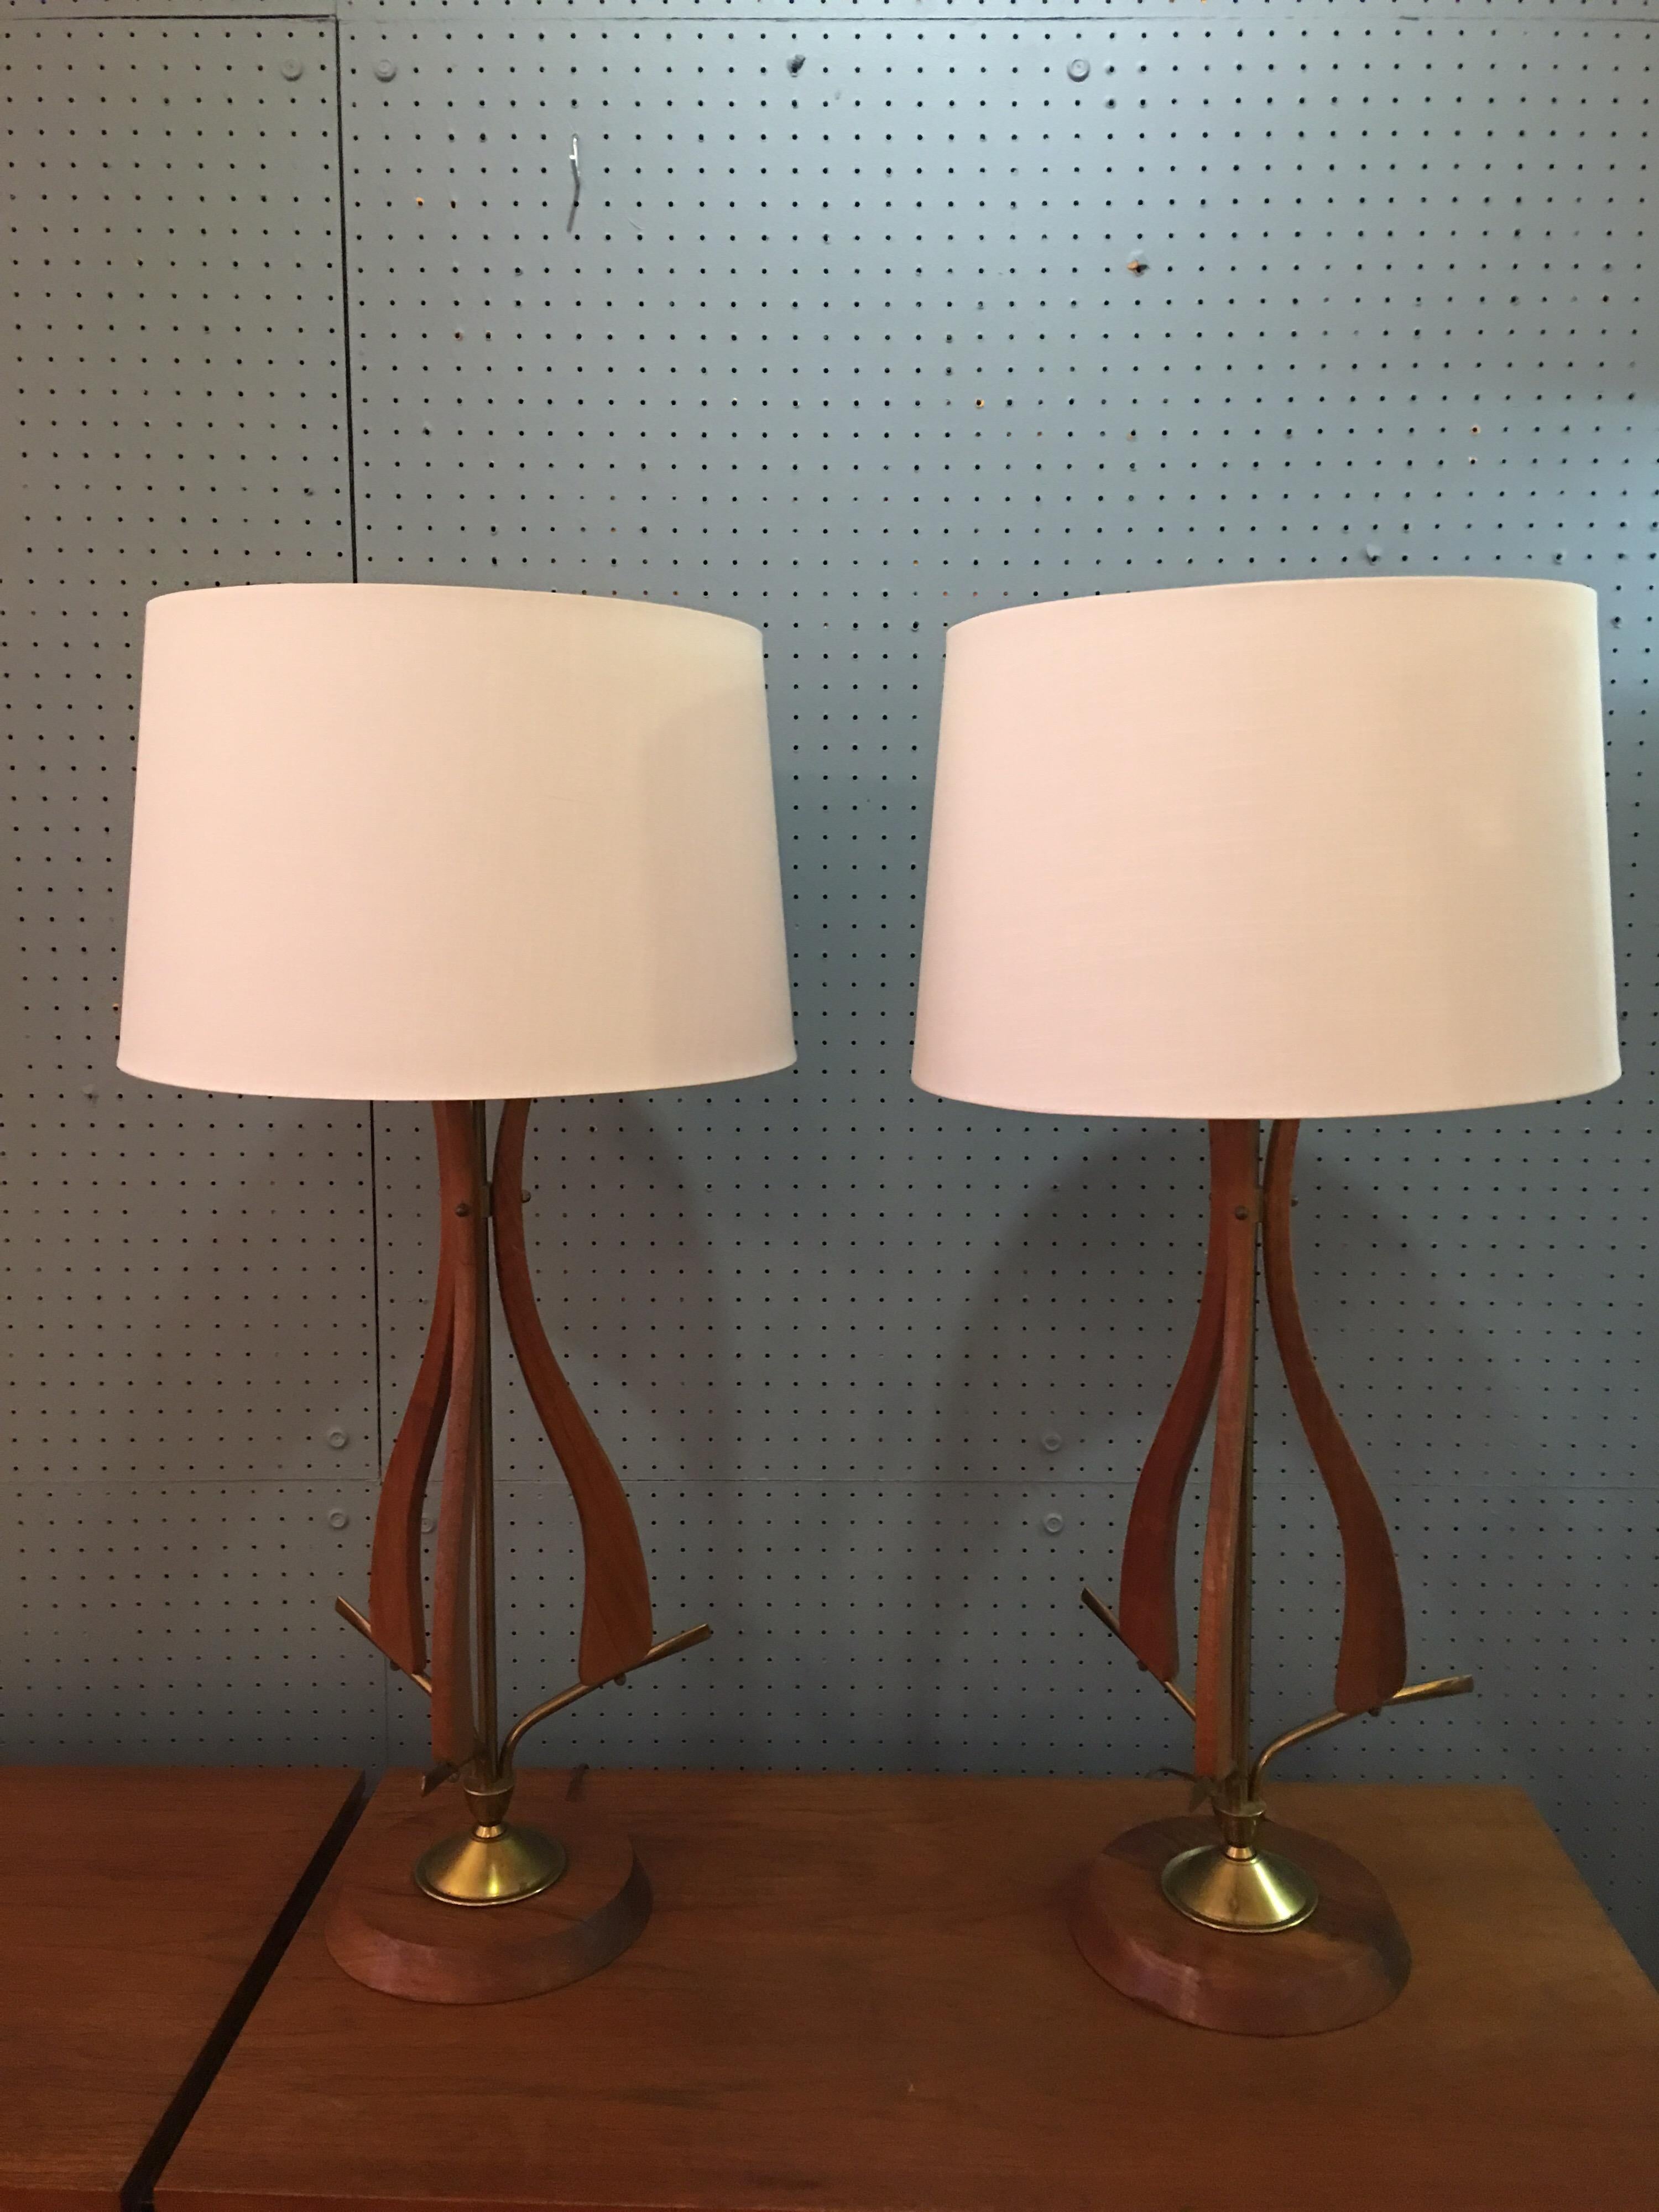 Pair of Wood and Brass Scandinavian Modern Table Lamps. Probably American late 60's but with all the Danish influences you could expect! Wood is in very nice original condition, brass shows patina! Very Handsome pair of lamps!